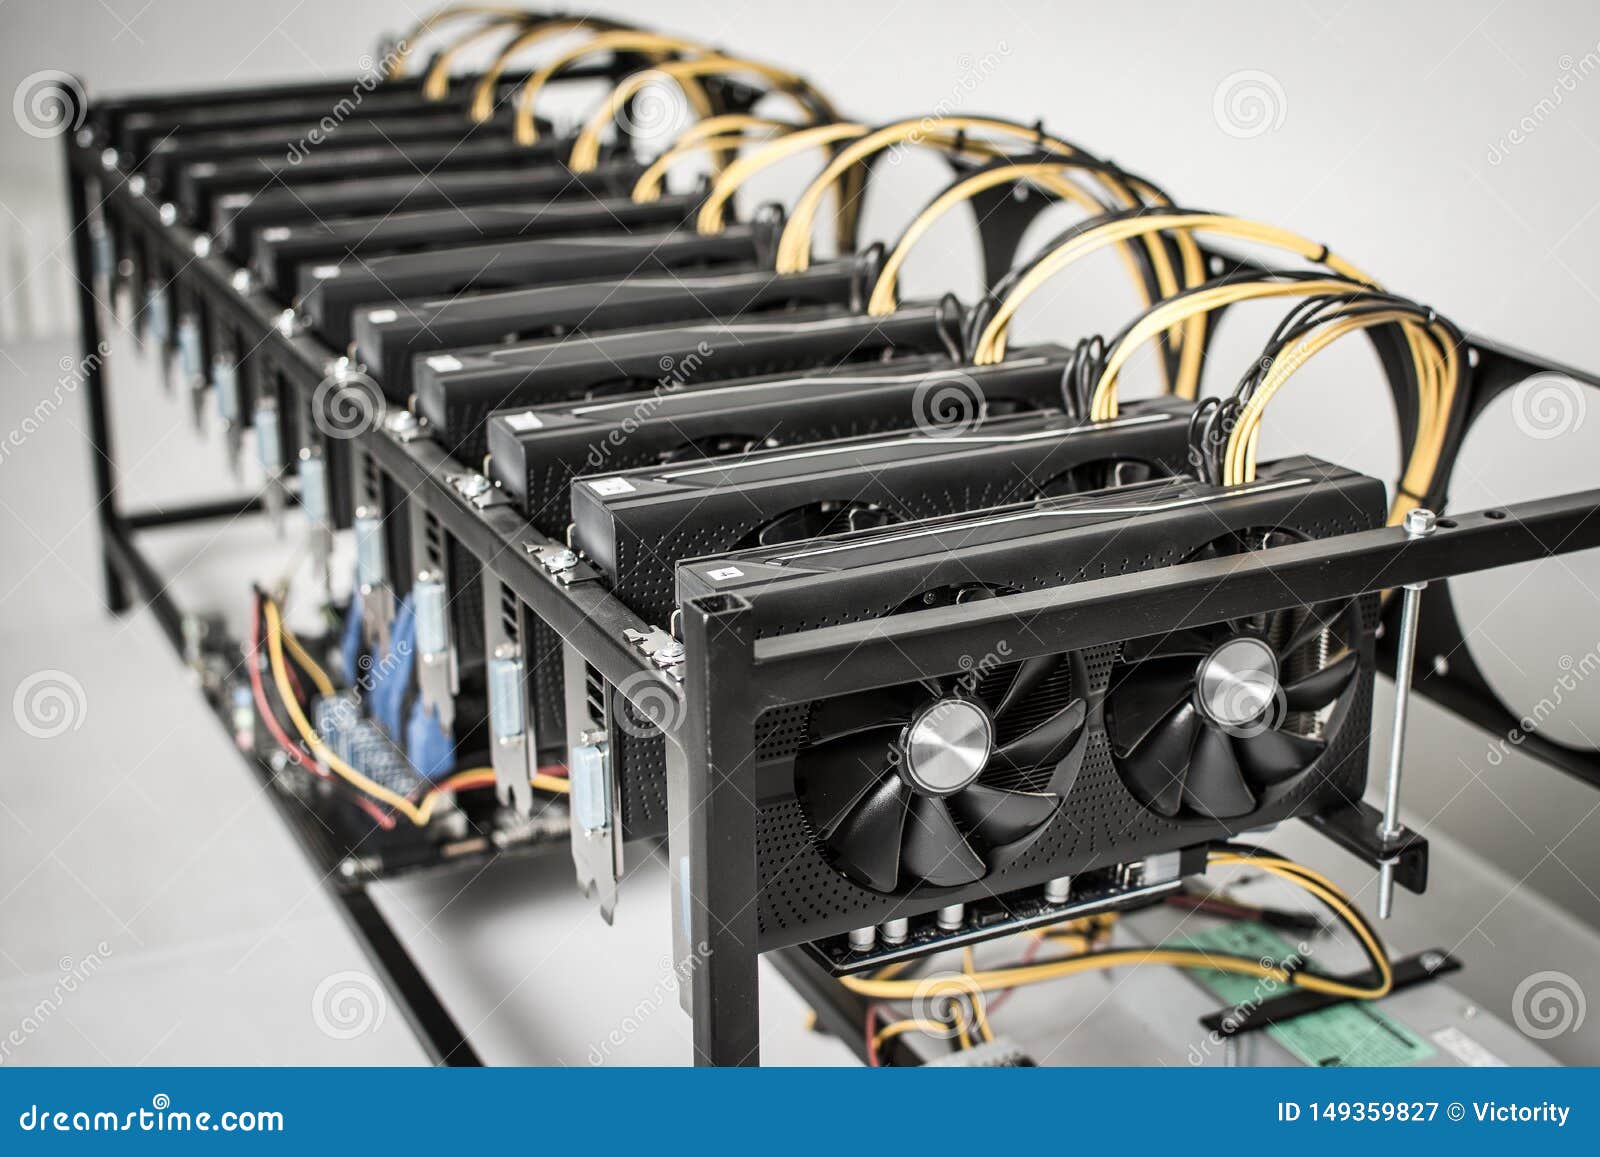 graphic card for crypto mining